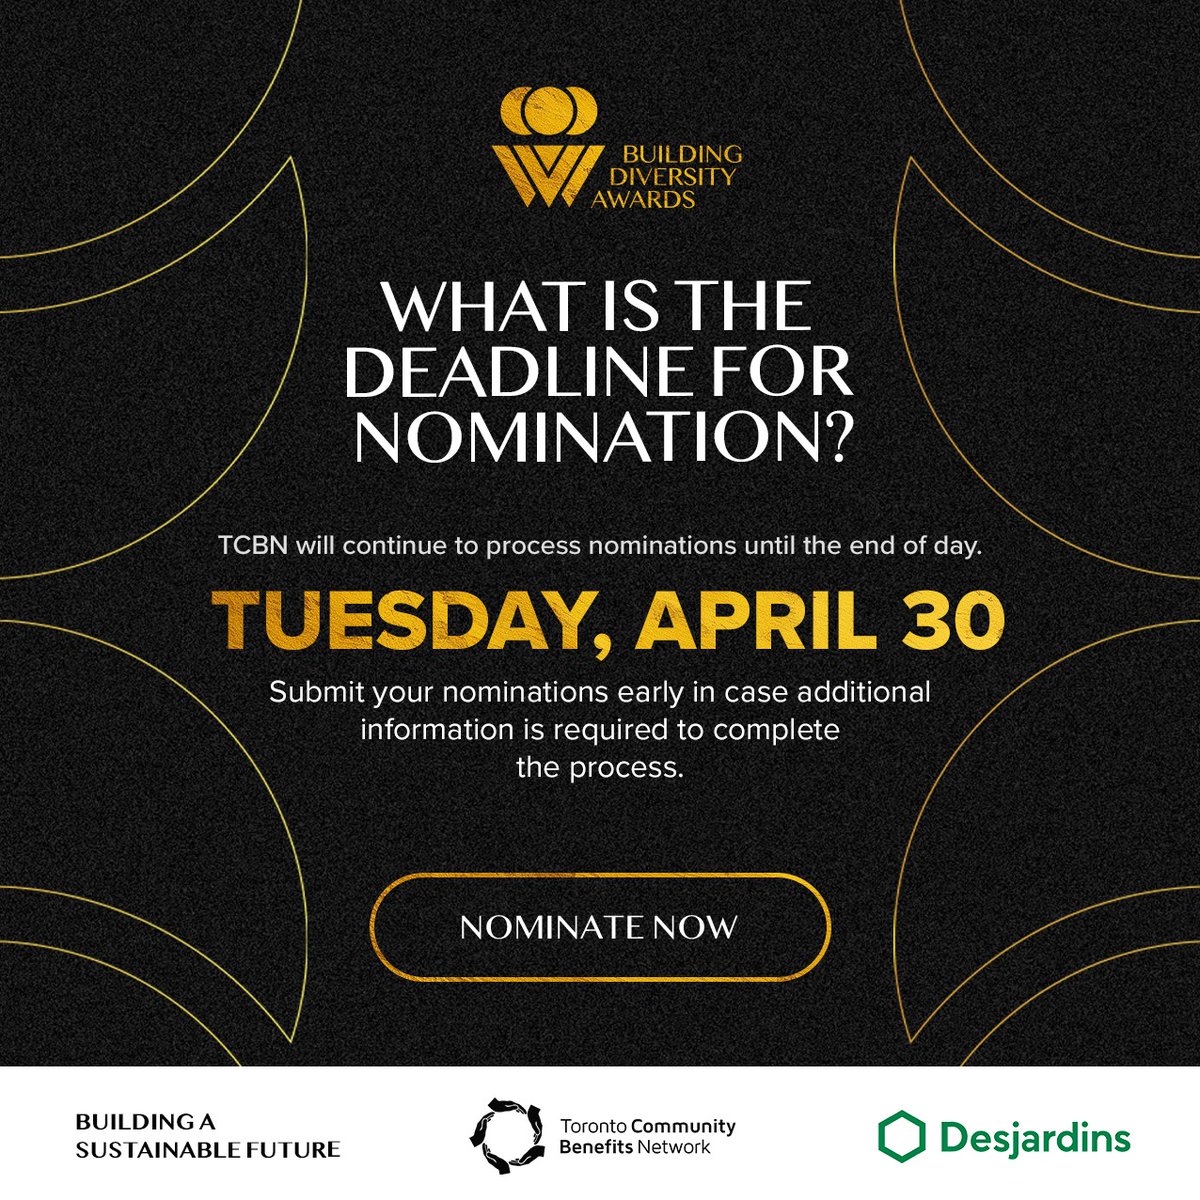 Do you know an individual or organization that deserves recognition? The deadline to nominate them is Tuesday April 30 To nominate for the 2024 Building Diversity Awards, please visit buildingdiversity.ca/nominations #BuildingDiversityAwards2024 #CommunityBenefits #diversityandinclusion